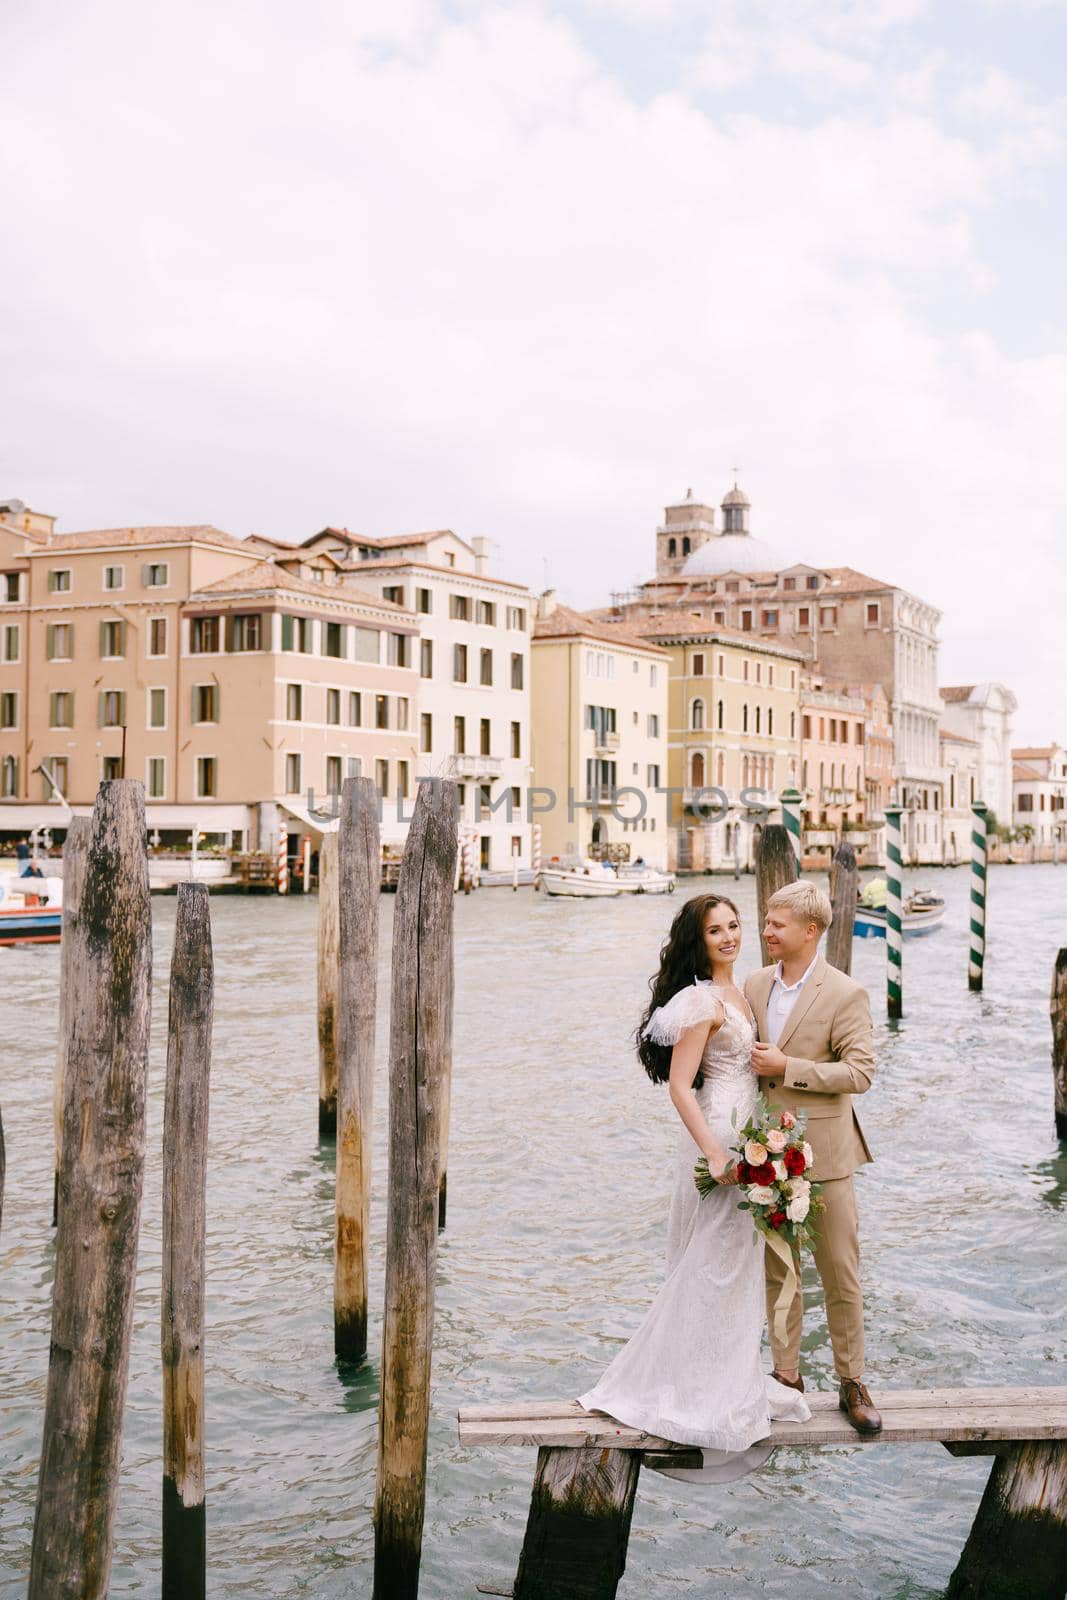 Italy wedding in Venice. The bride and groom are standing on a wooden pier for boats and gondolas, near the Striped green and white mooring poles, against backdrop of facades of Grand Canal buildings. by Nadtochiy